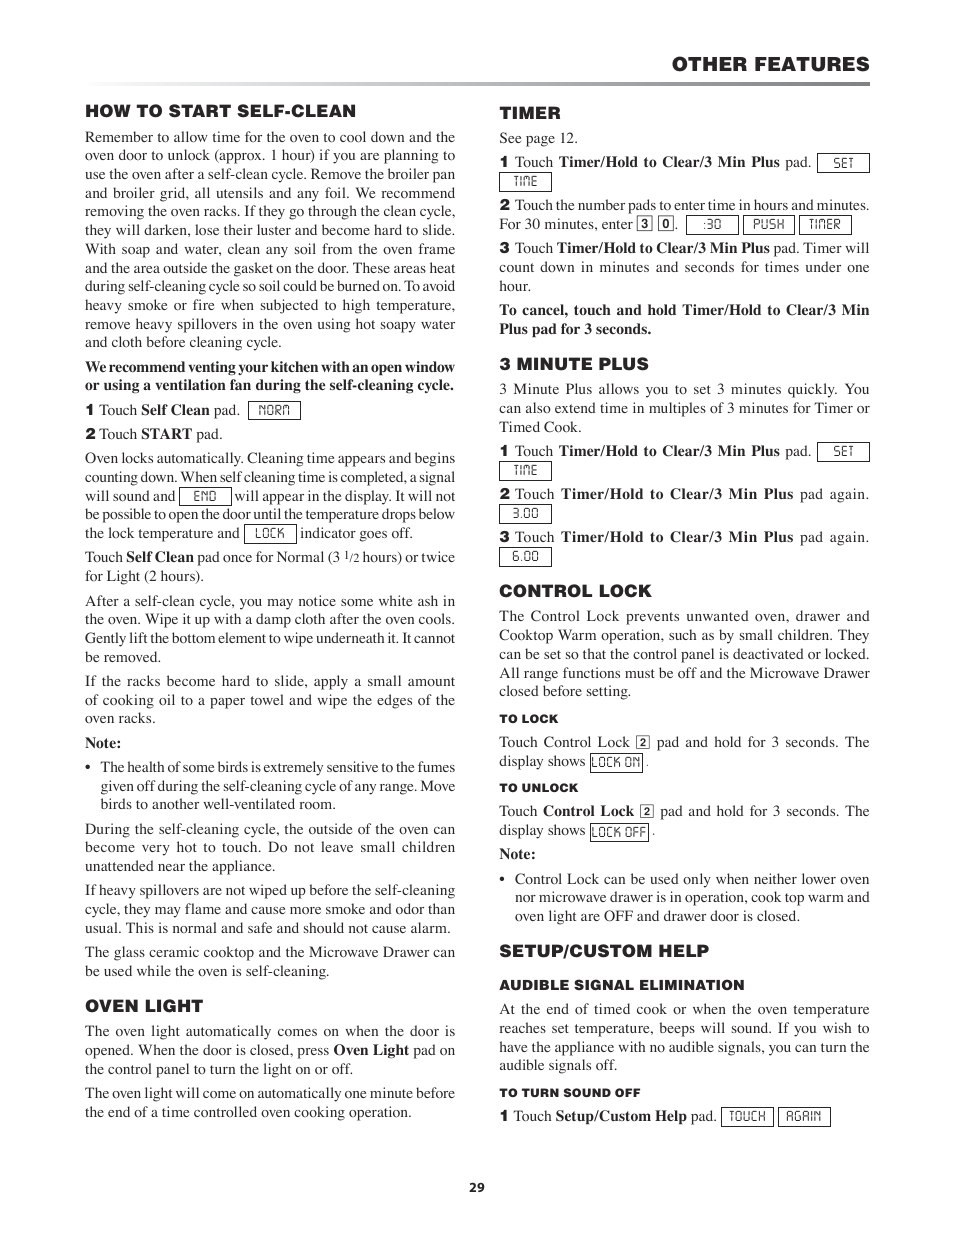 Other features | Sharp KB-3411J User Manual | Page 29 / 40